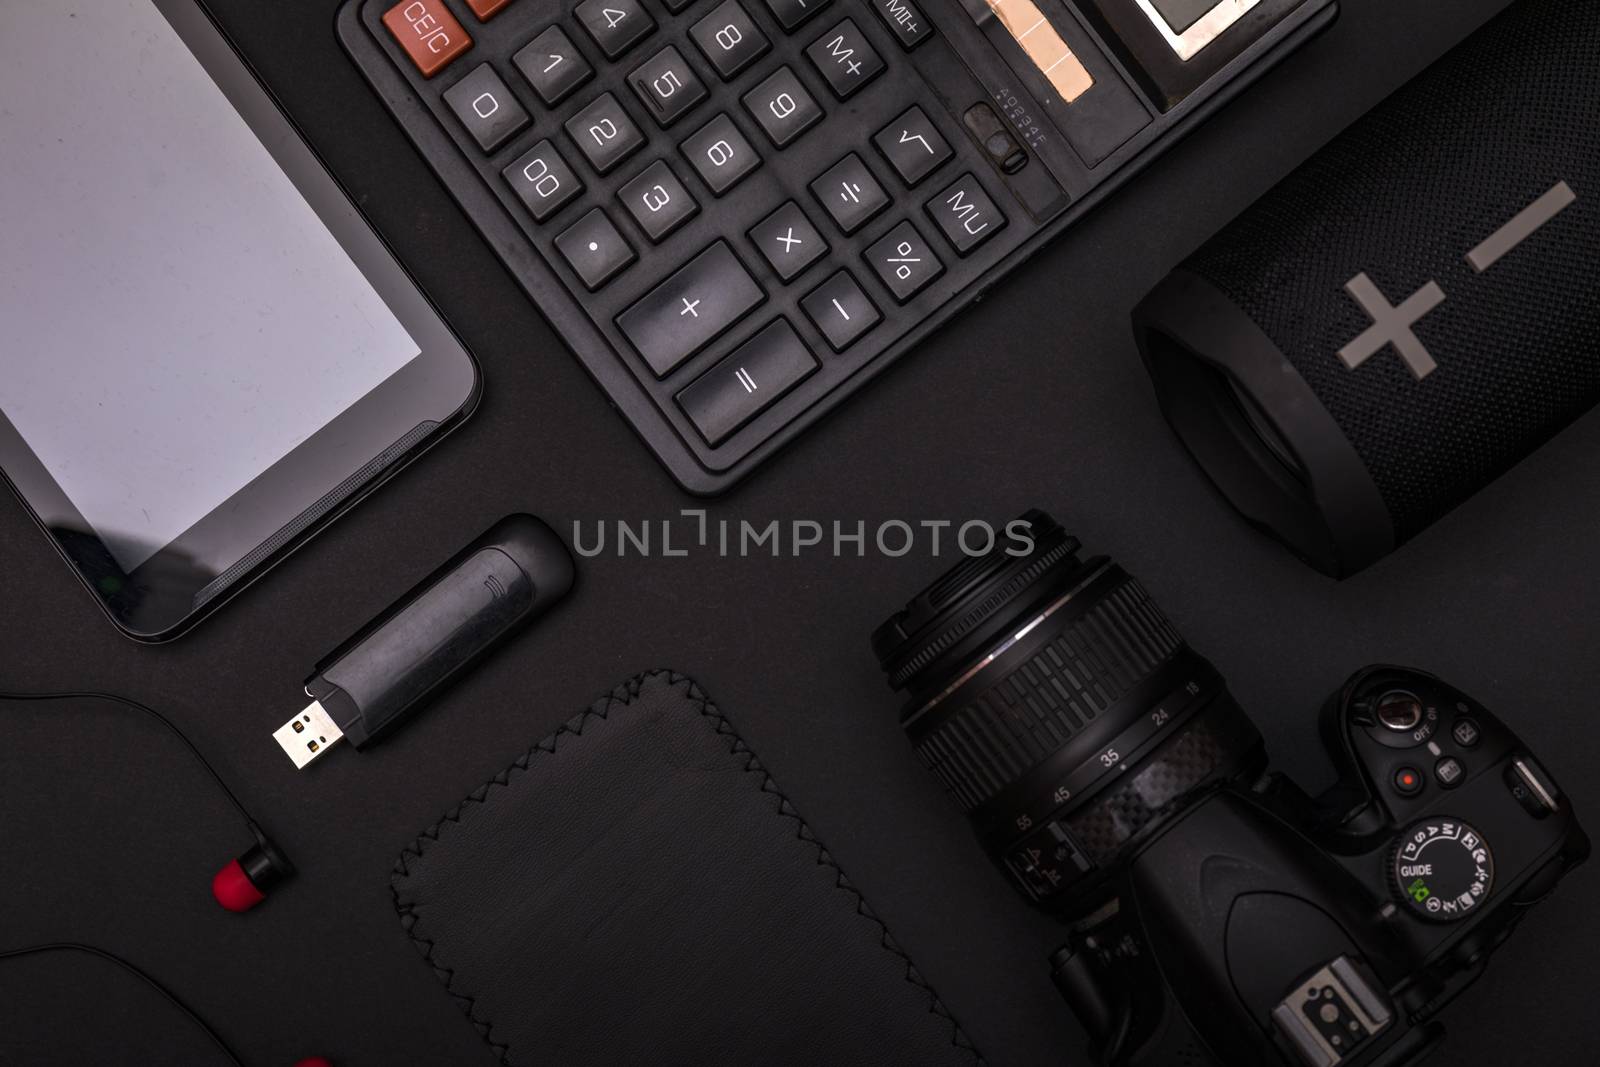 Top view of pitch black office desk with calculator, usb drive, earphones, dslr camera and wireless speaker. Minimal black design concept.